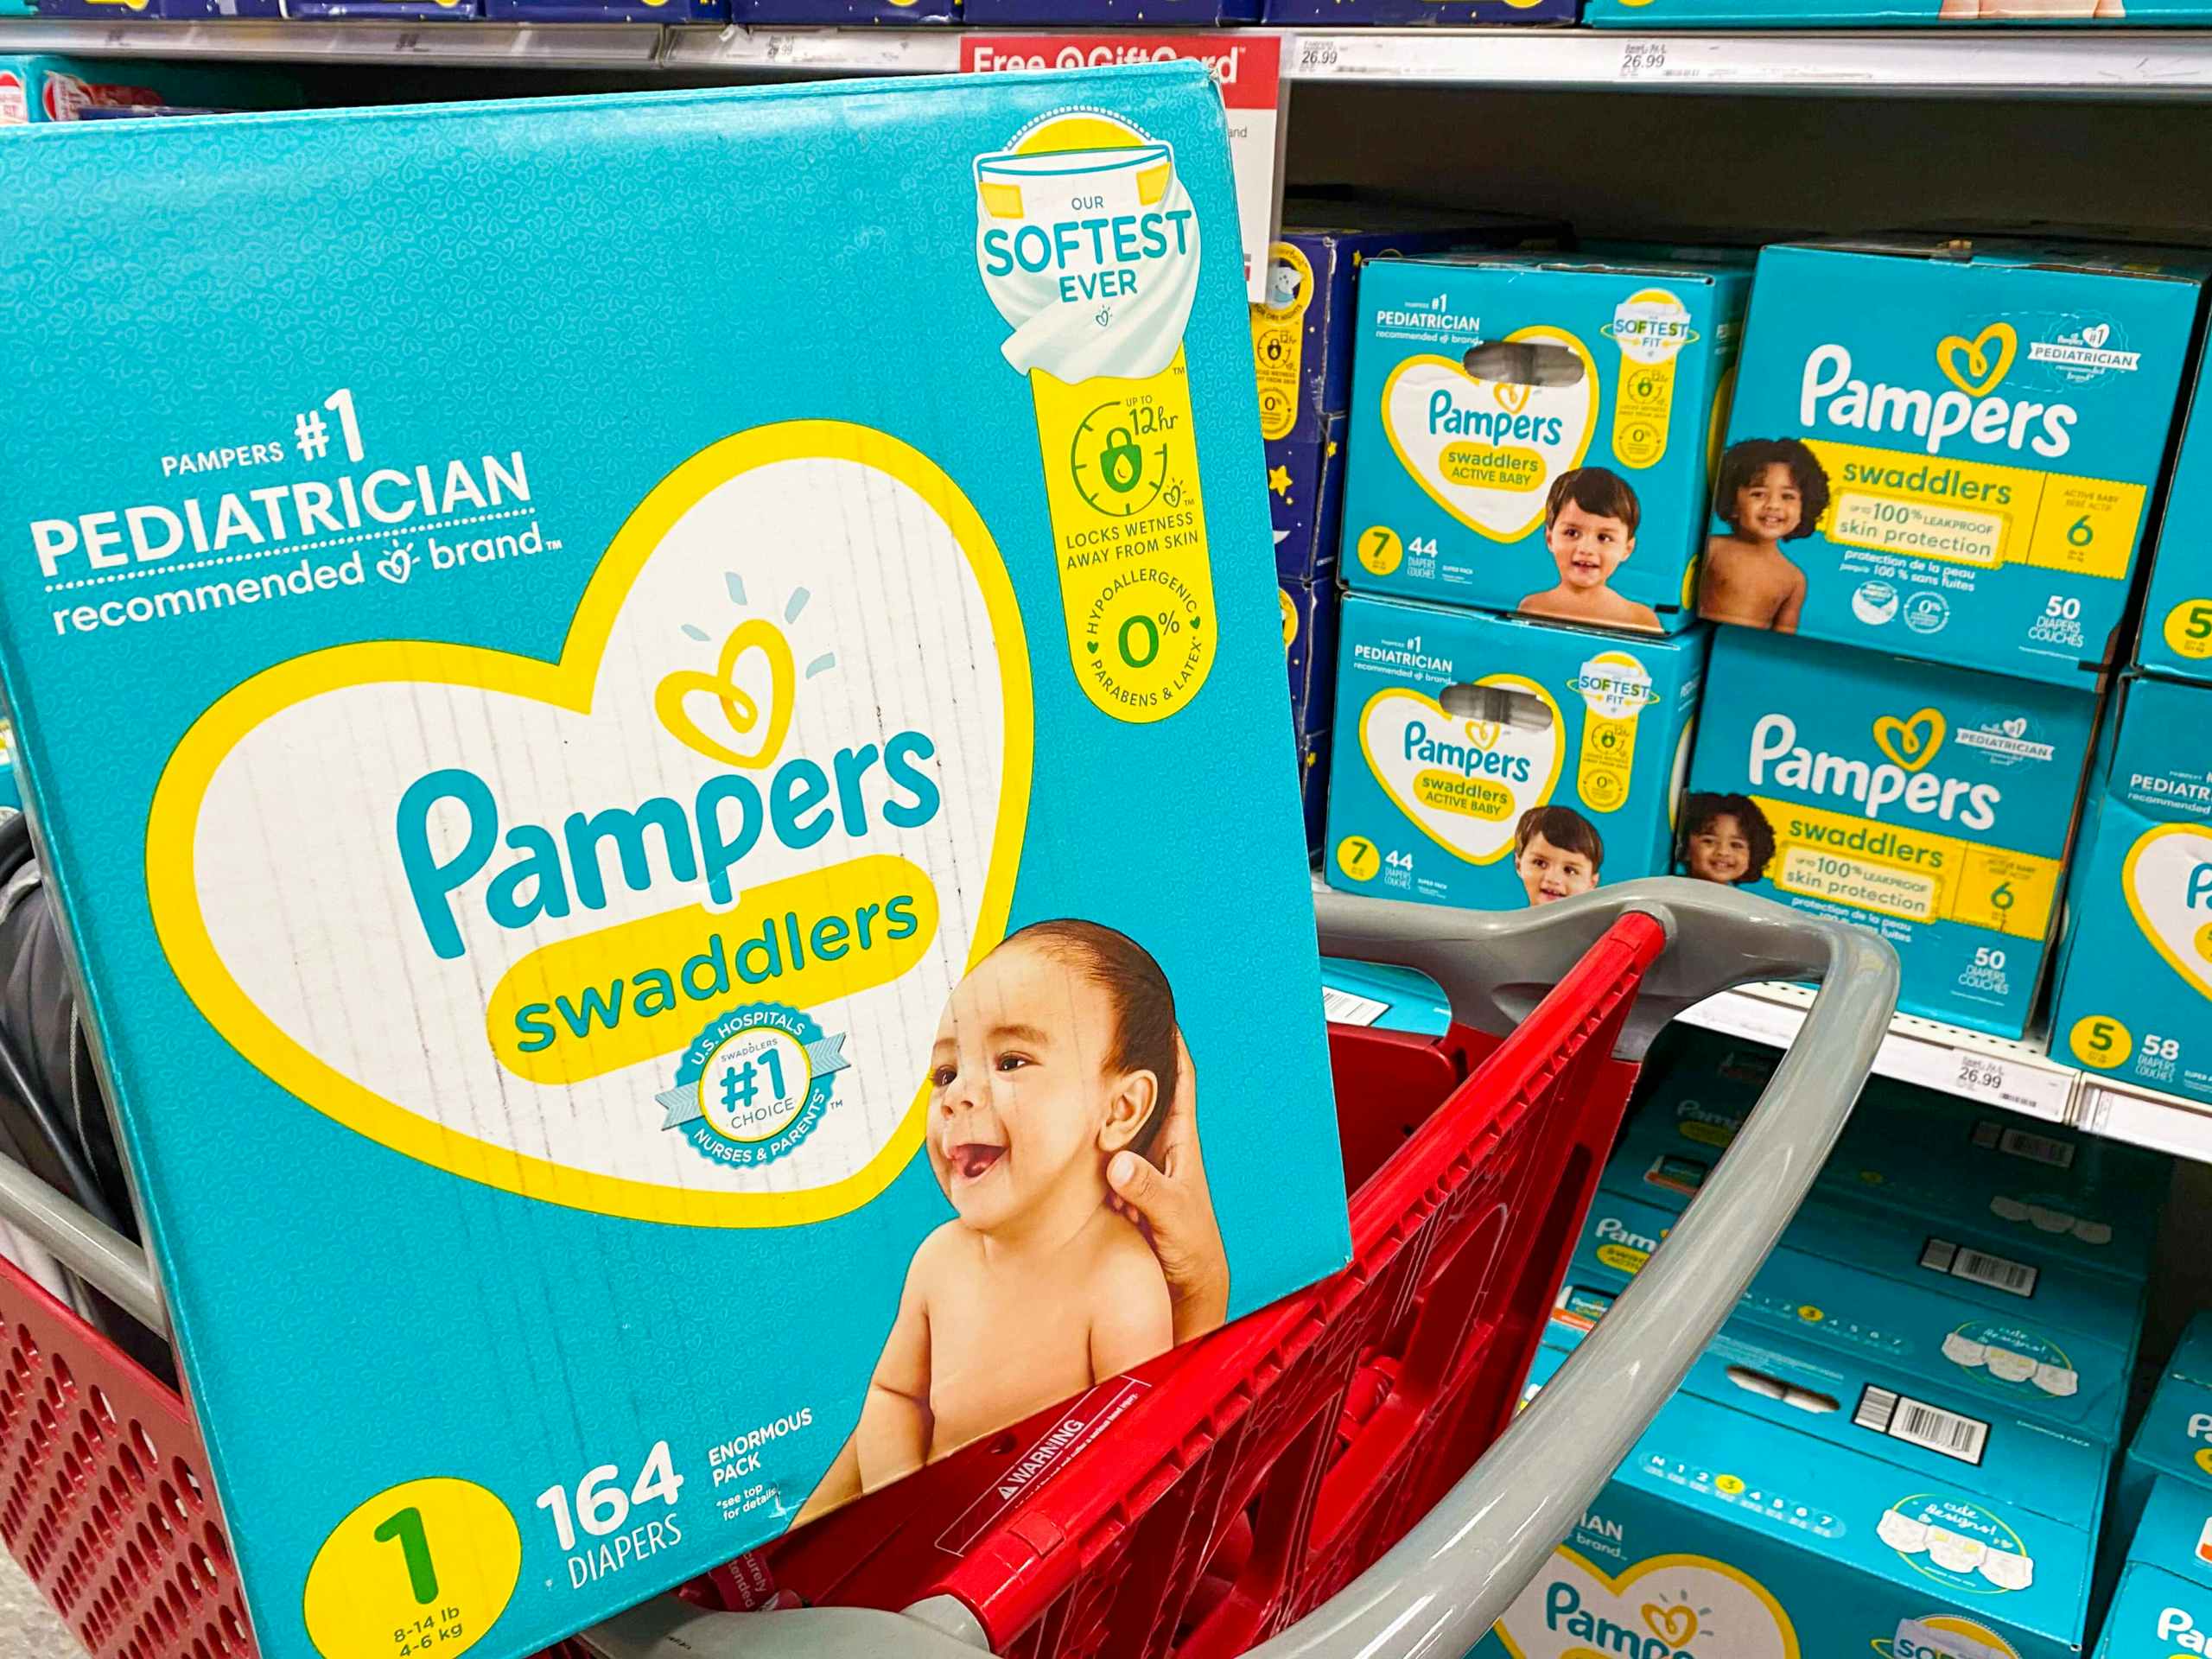 box of Pampers in Target shopping cart